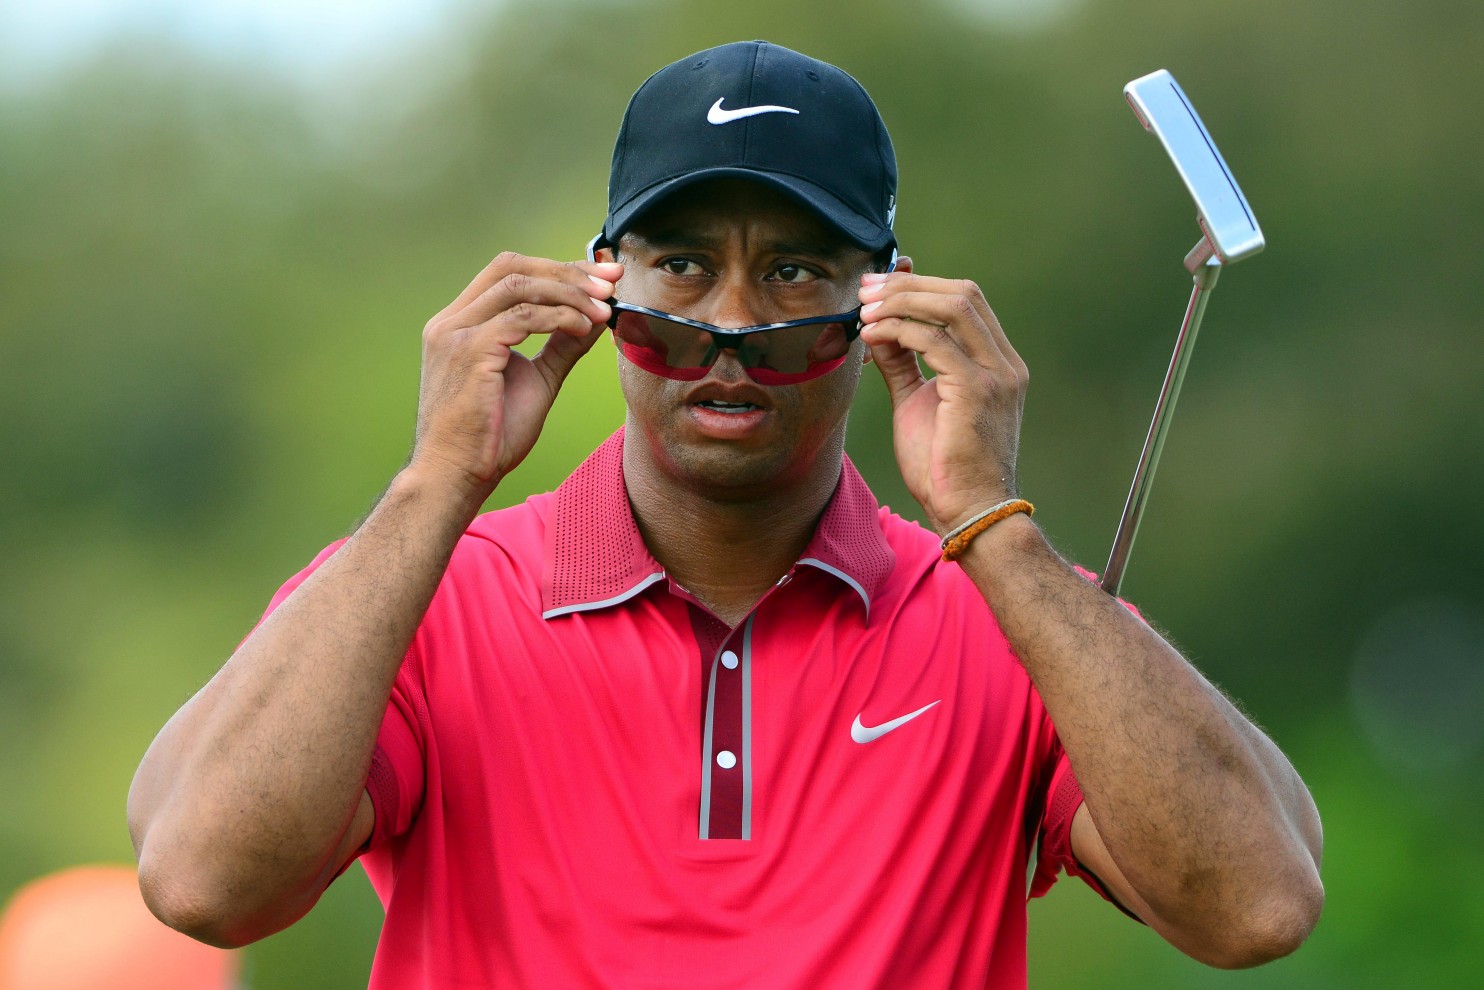 Tiger Woods spotted using Scotty Cameron Futura putter at golf shoot